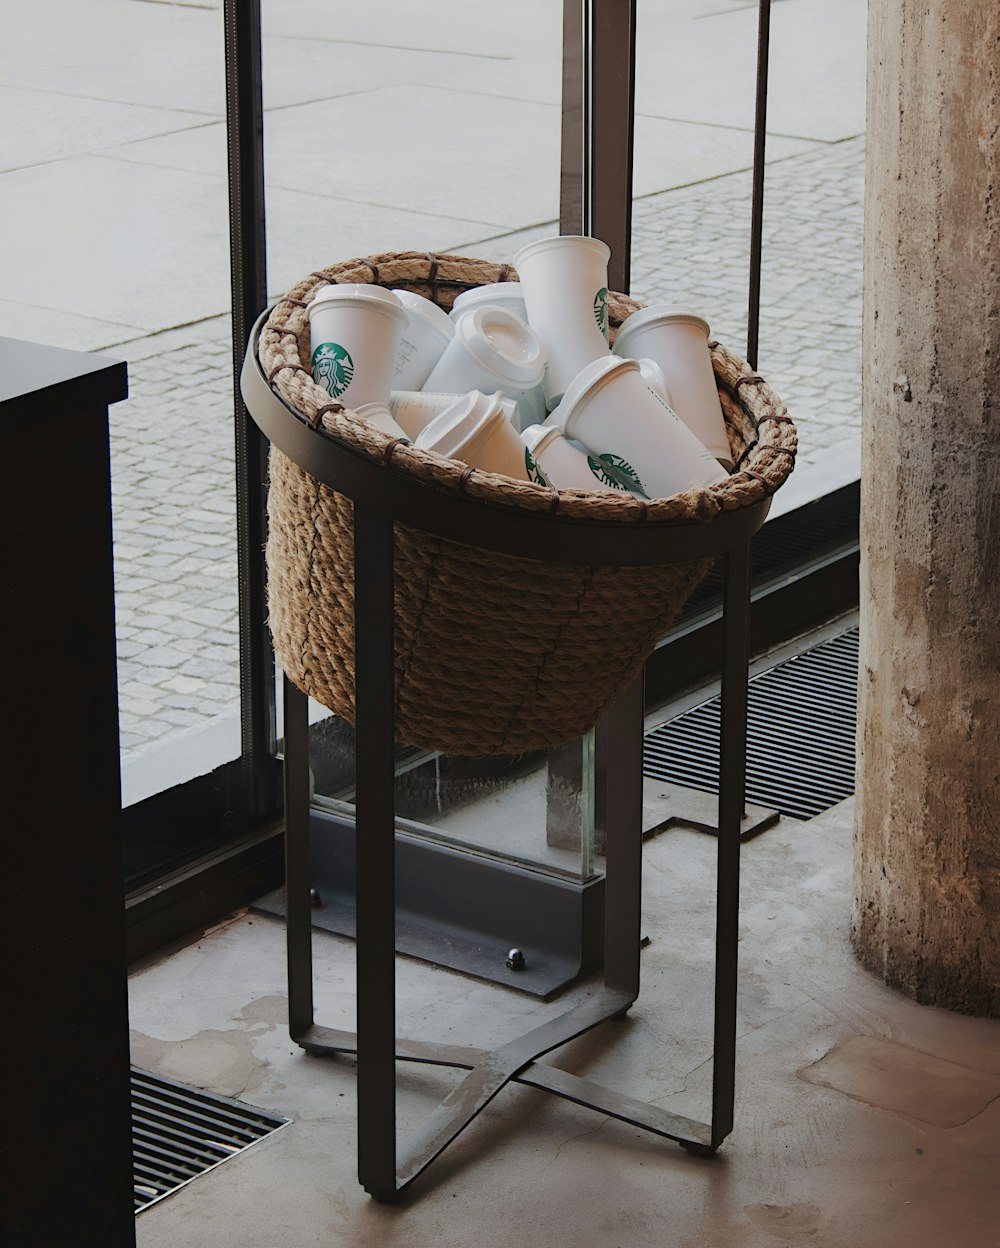 a basket filled with cups sitting on top of a metal stand